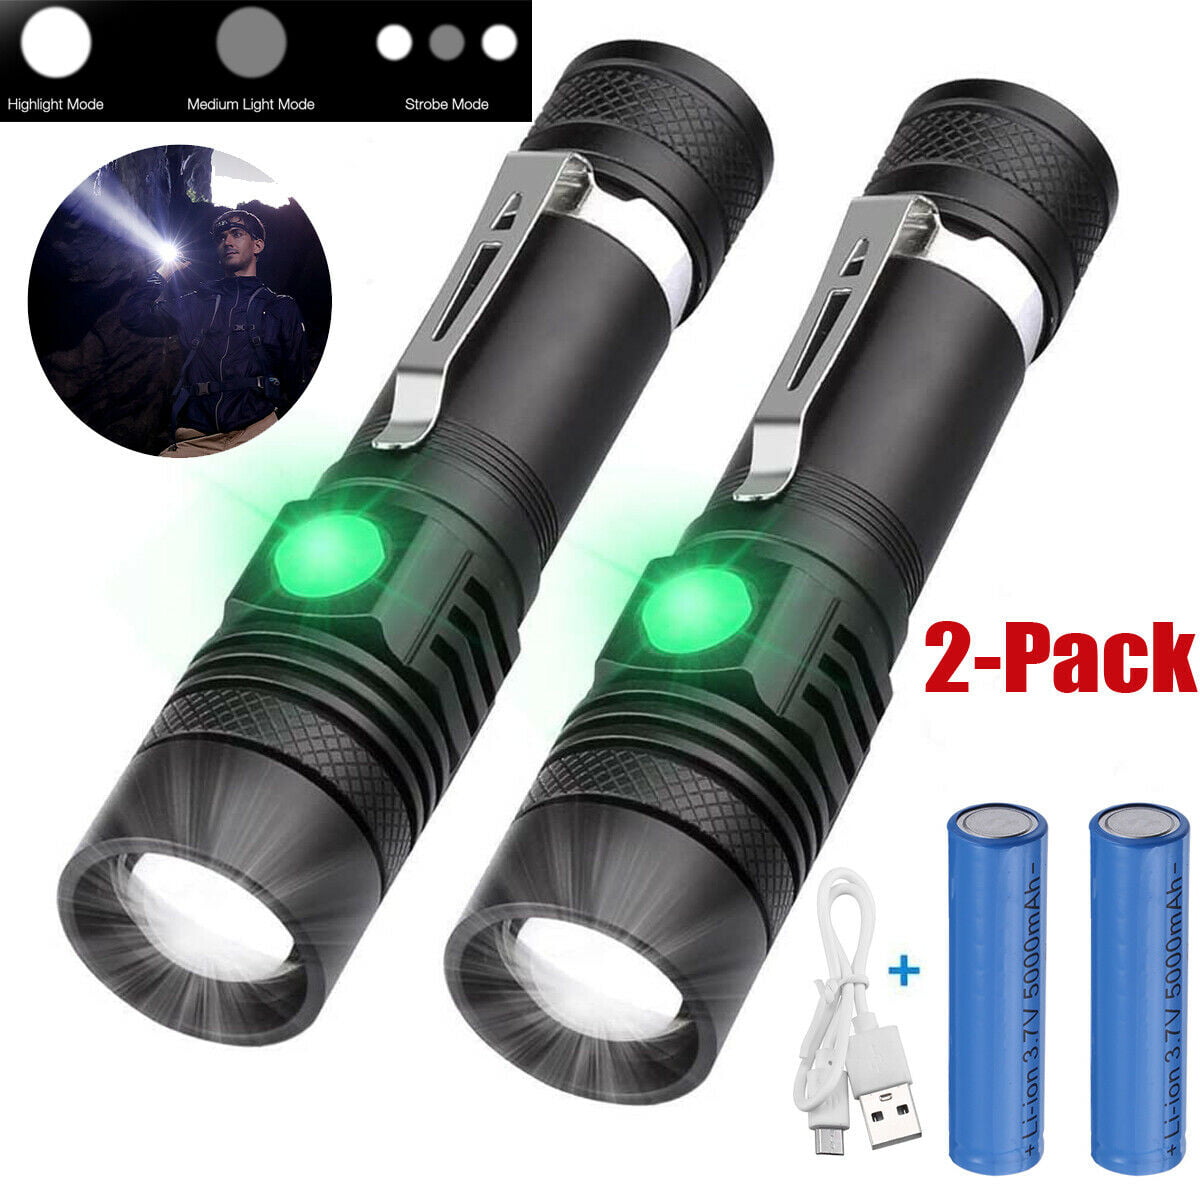 Led flashlight Two in one work light USB recharable similar to snapon 